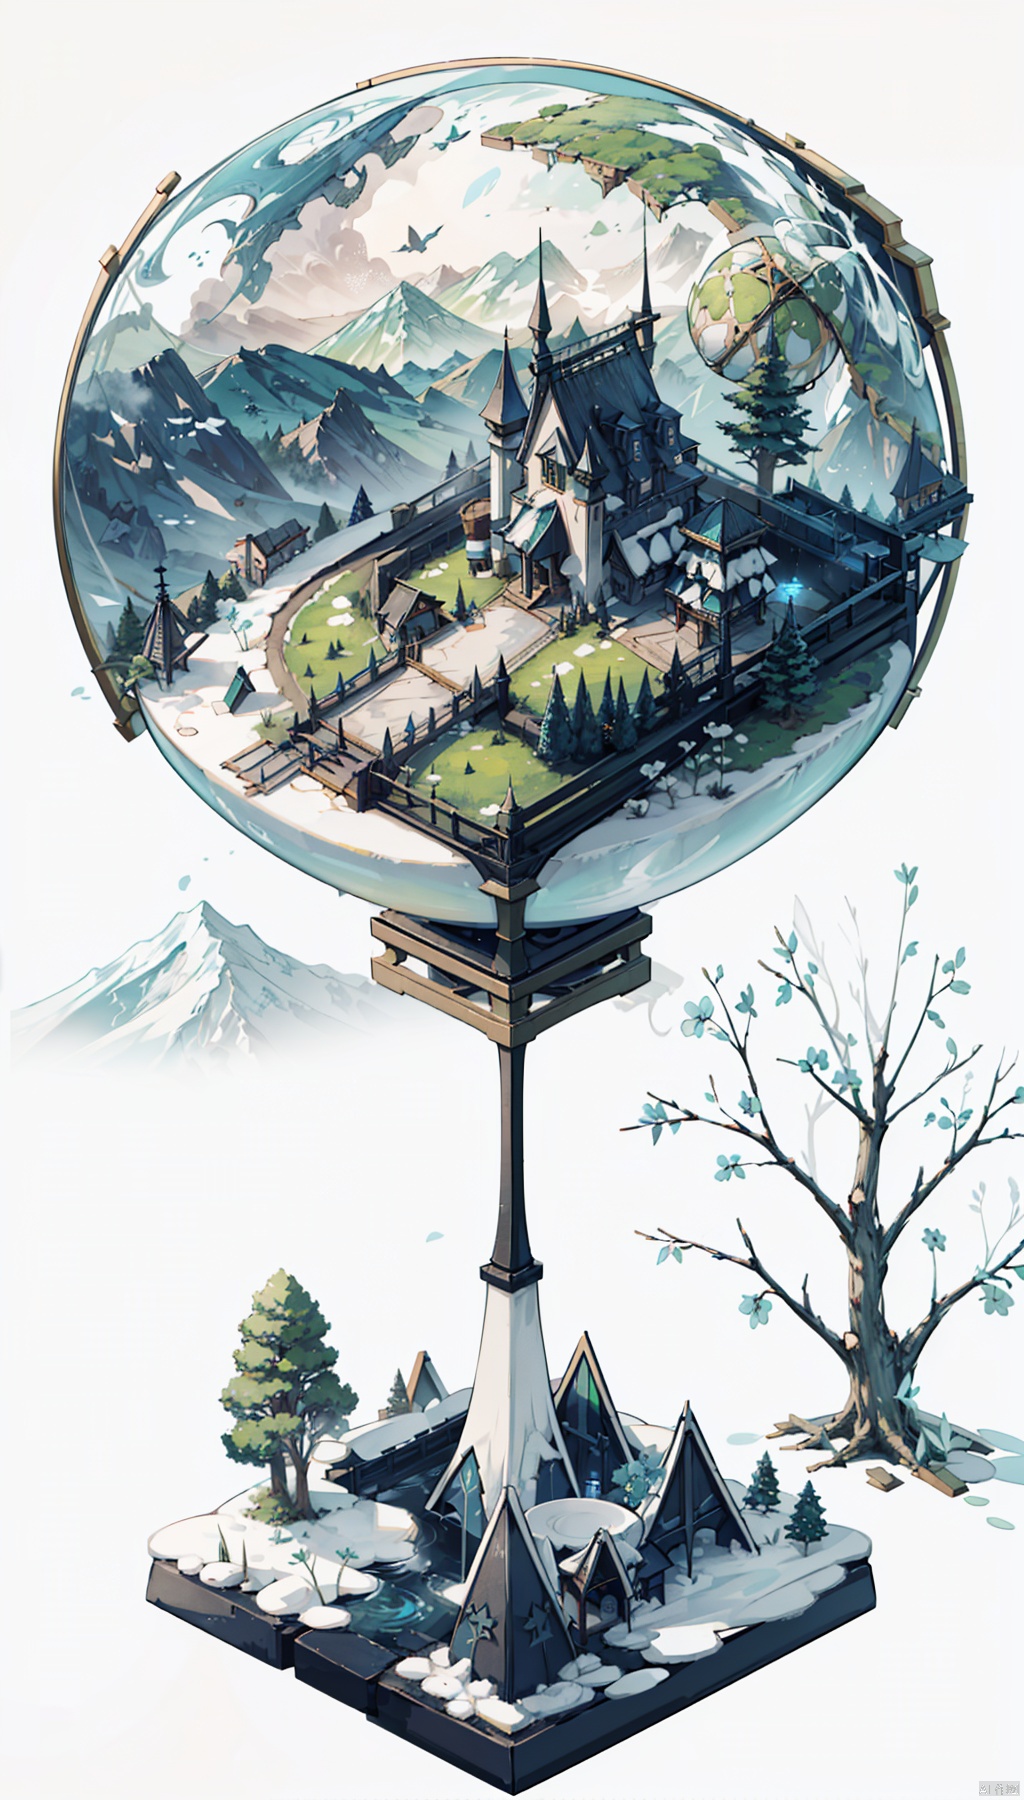 (best quality), (4k resolution), creative illustration of a miniature world on a white pedestal. The world is a green sphere with various natural and artificial elements. There is a river, trees, mountains, and a small house on the sphere. The image has a minimalist style with a light color palette that creates a contrast with the white background